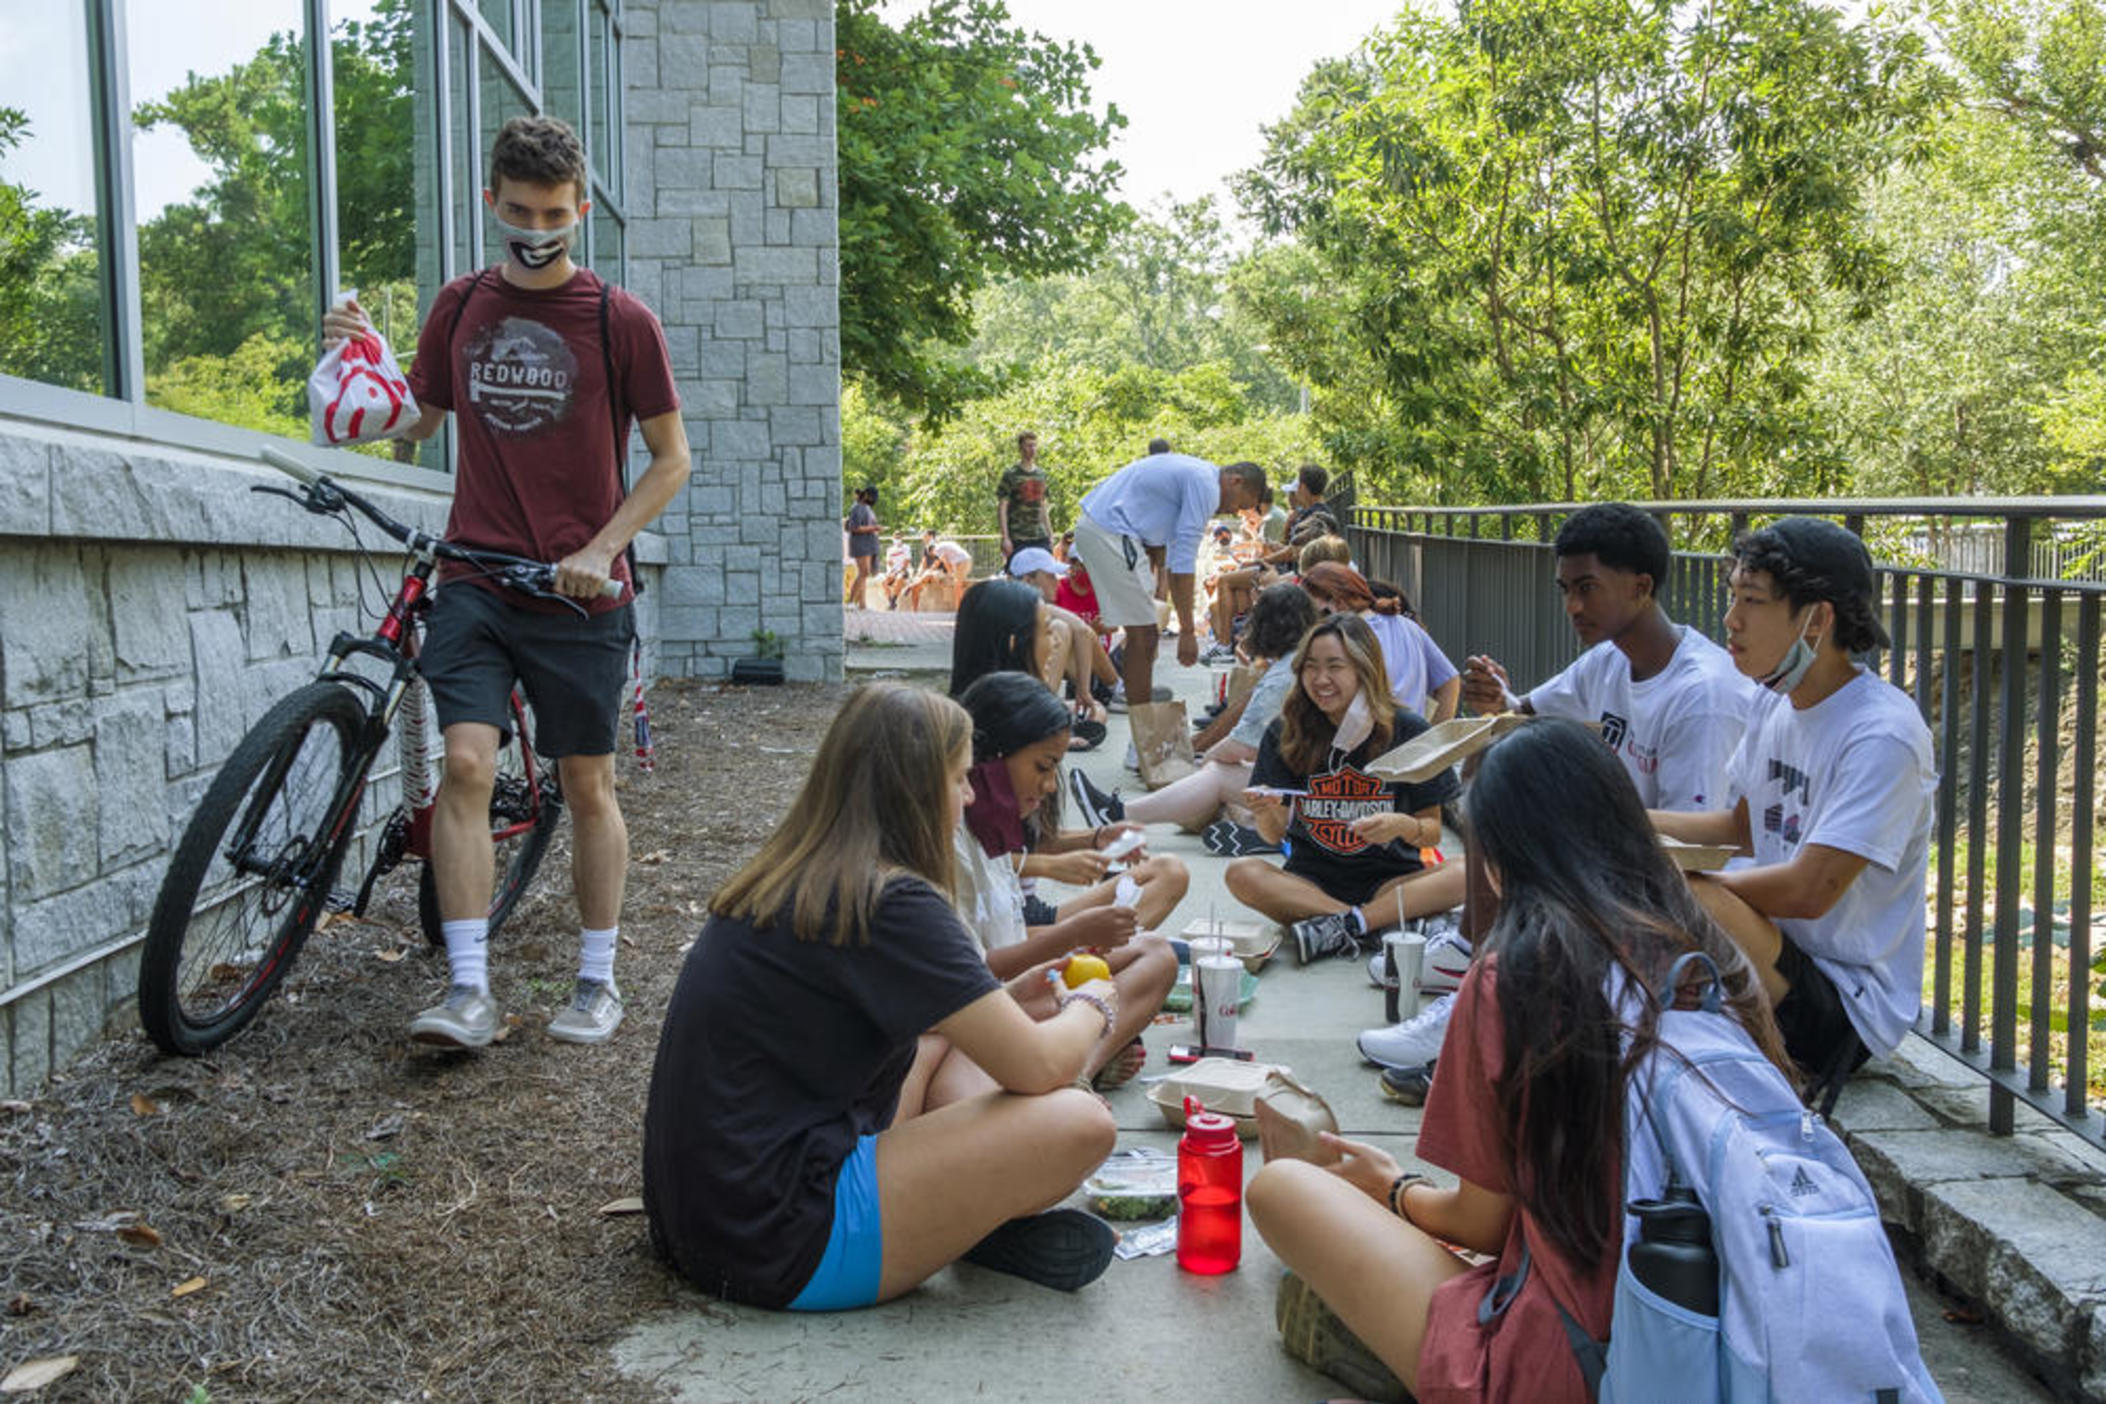 University of Georgia freshmen eat lunch behind one of the main dining halls.